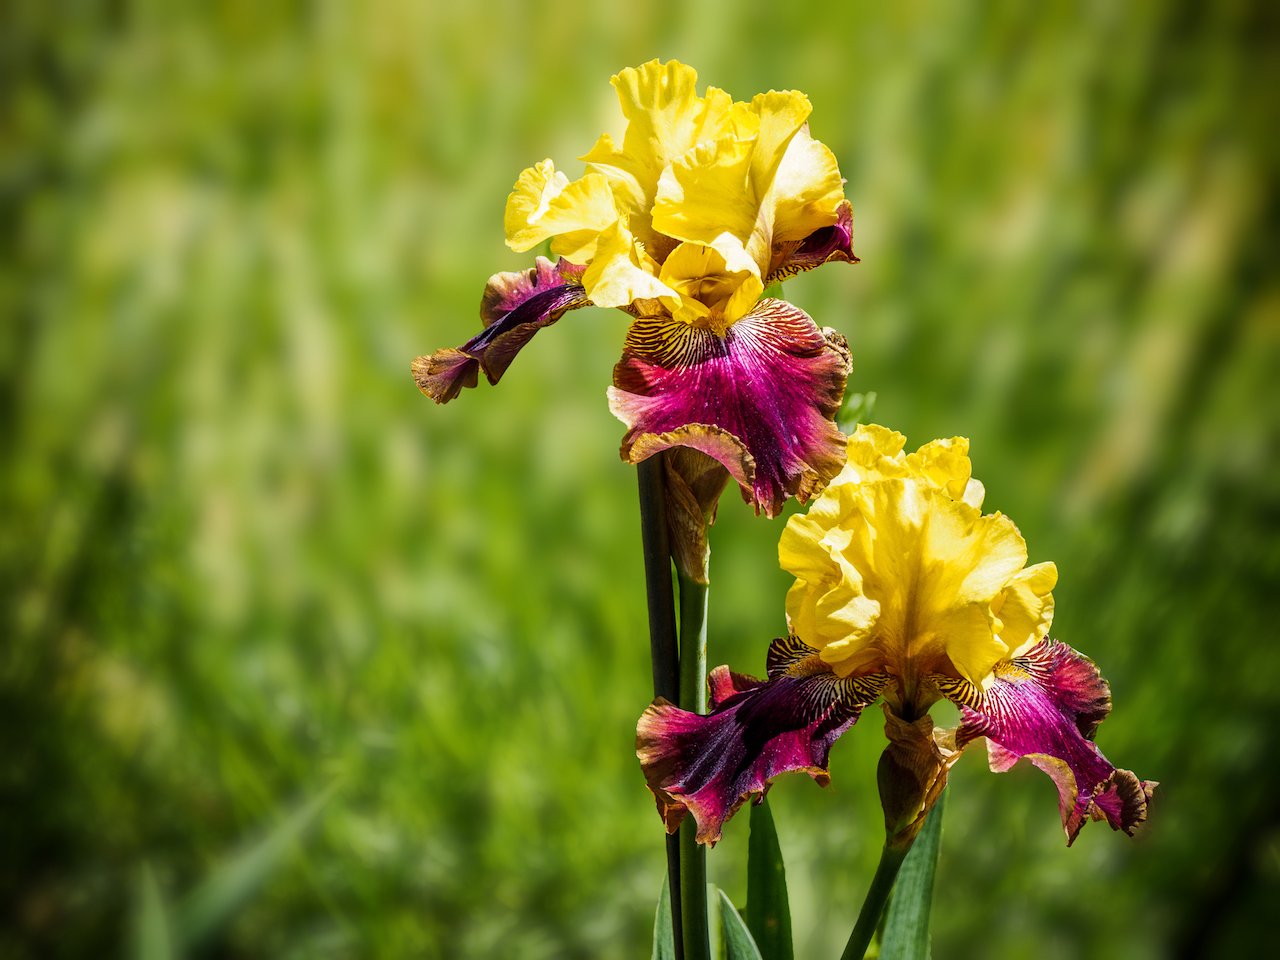 Blooming iris in the garden, with shallow depth of field and blurred background.